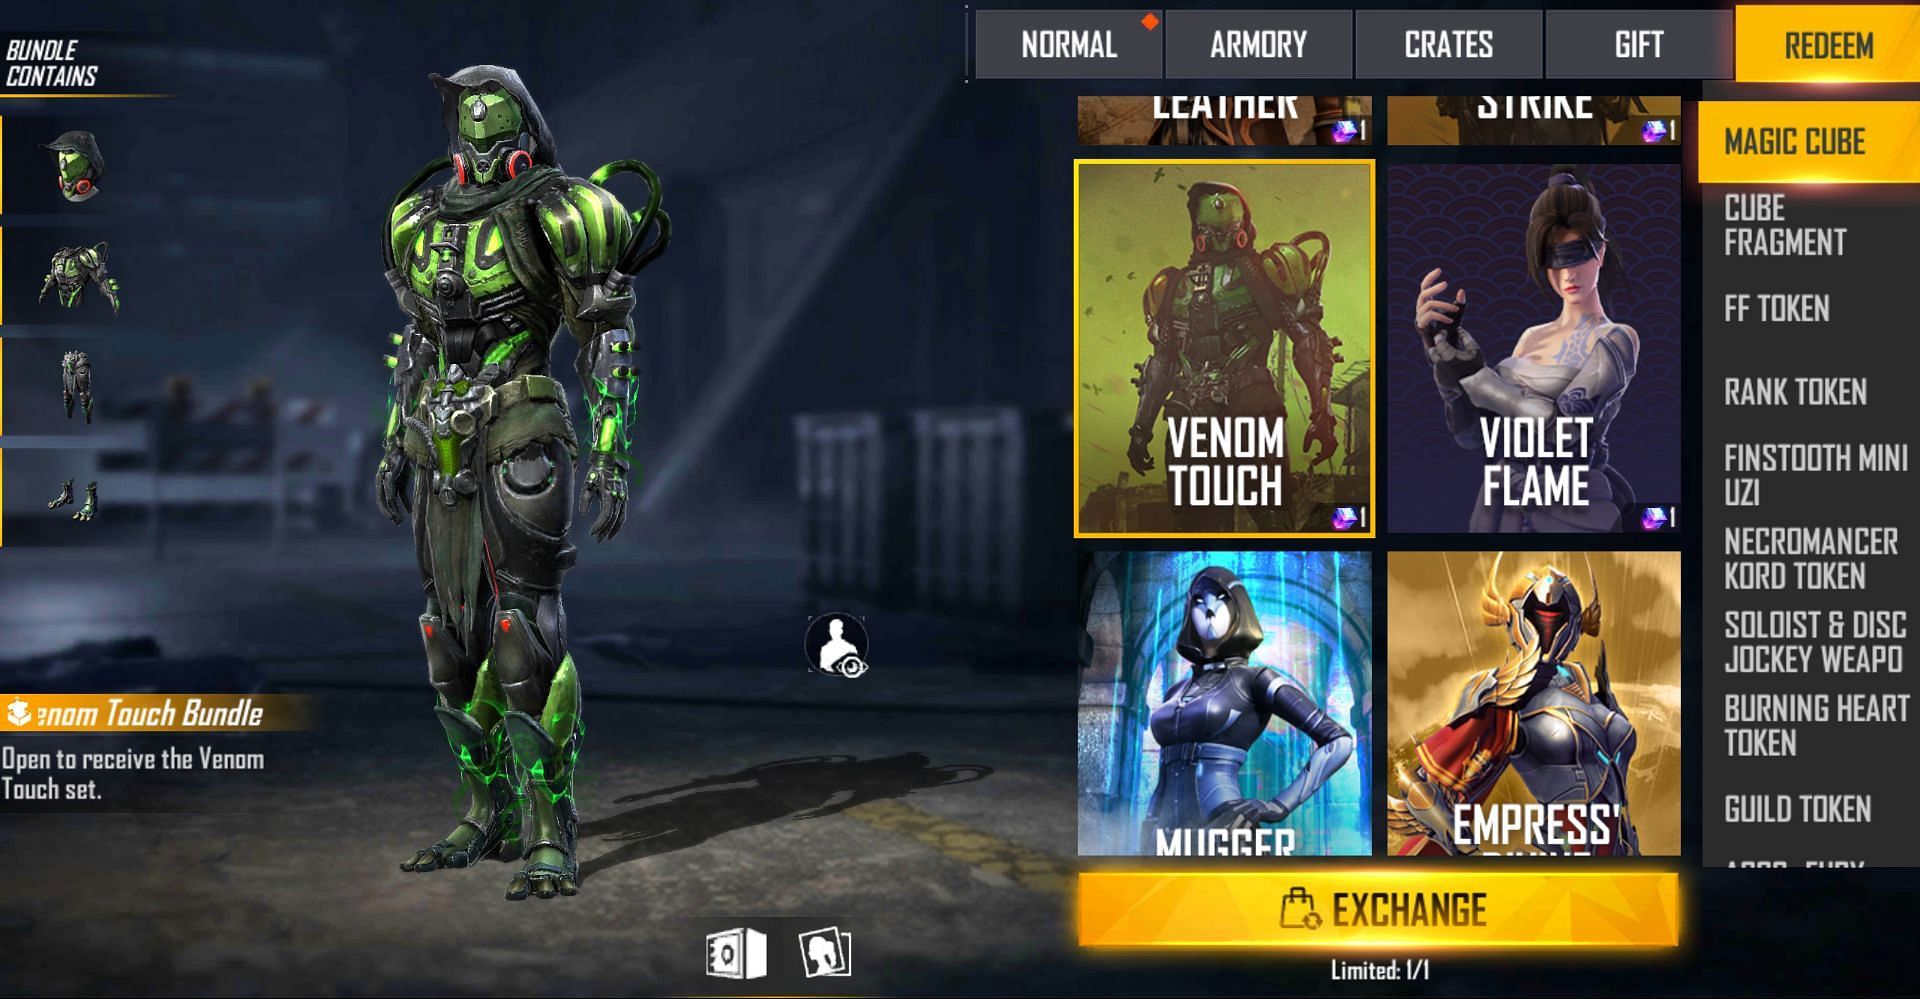 Venom Touch Bundle was released in June 2019 (Image via Free Fire)